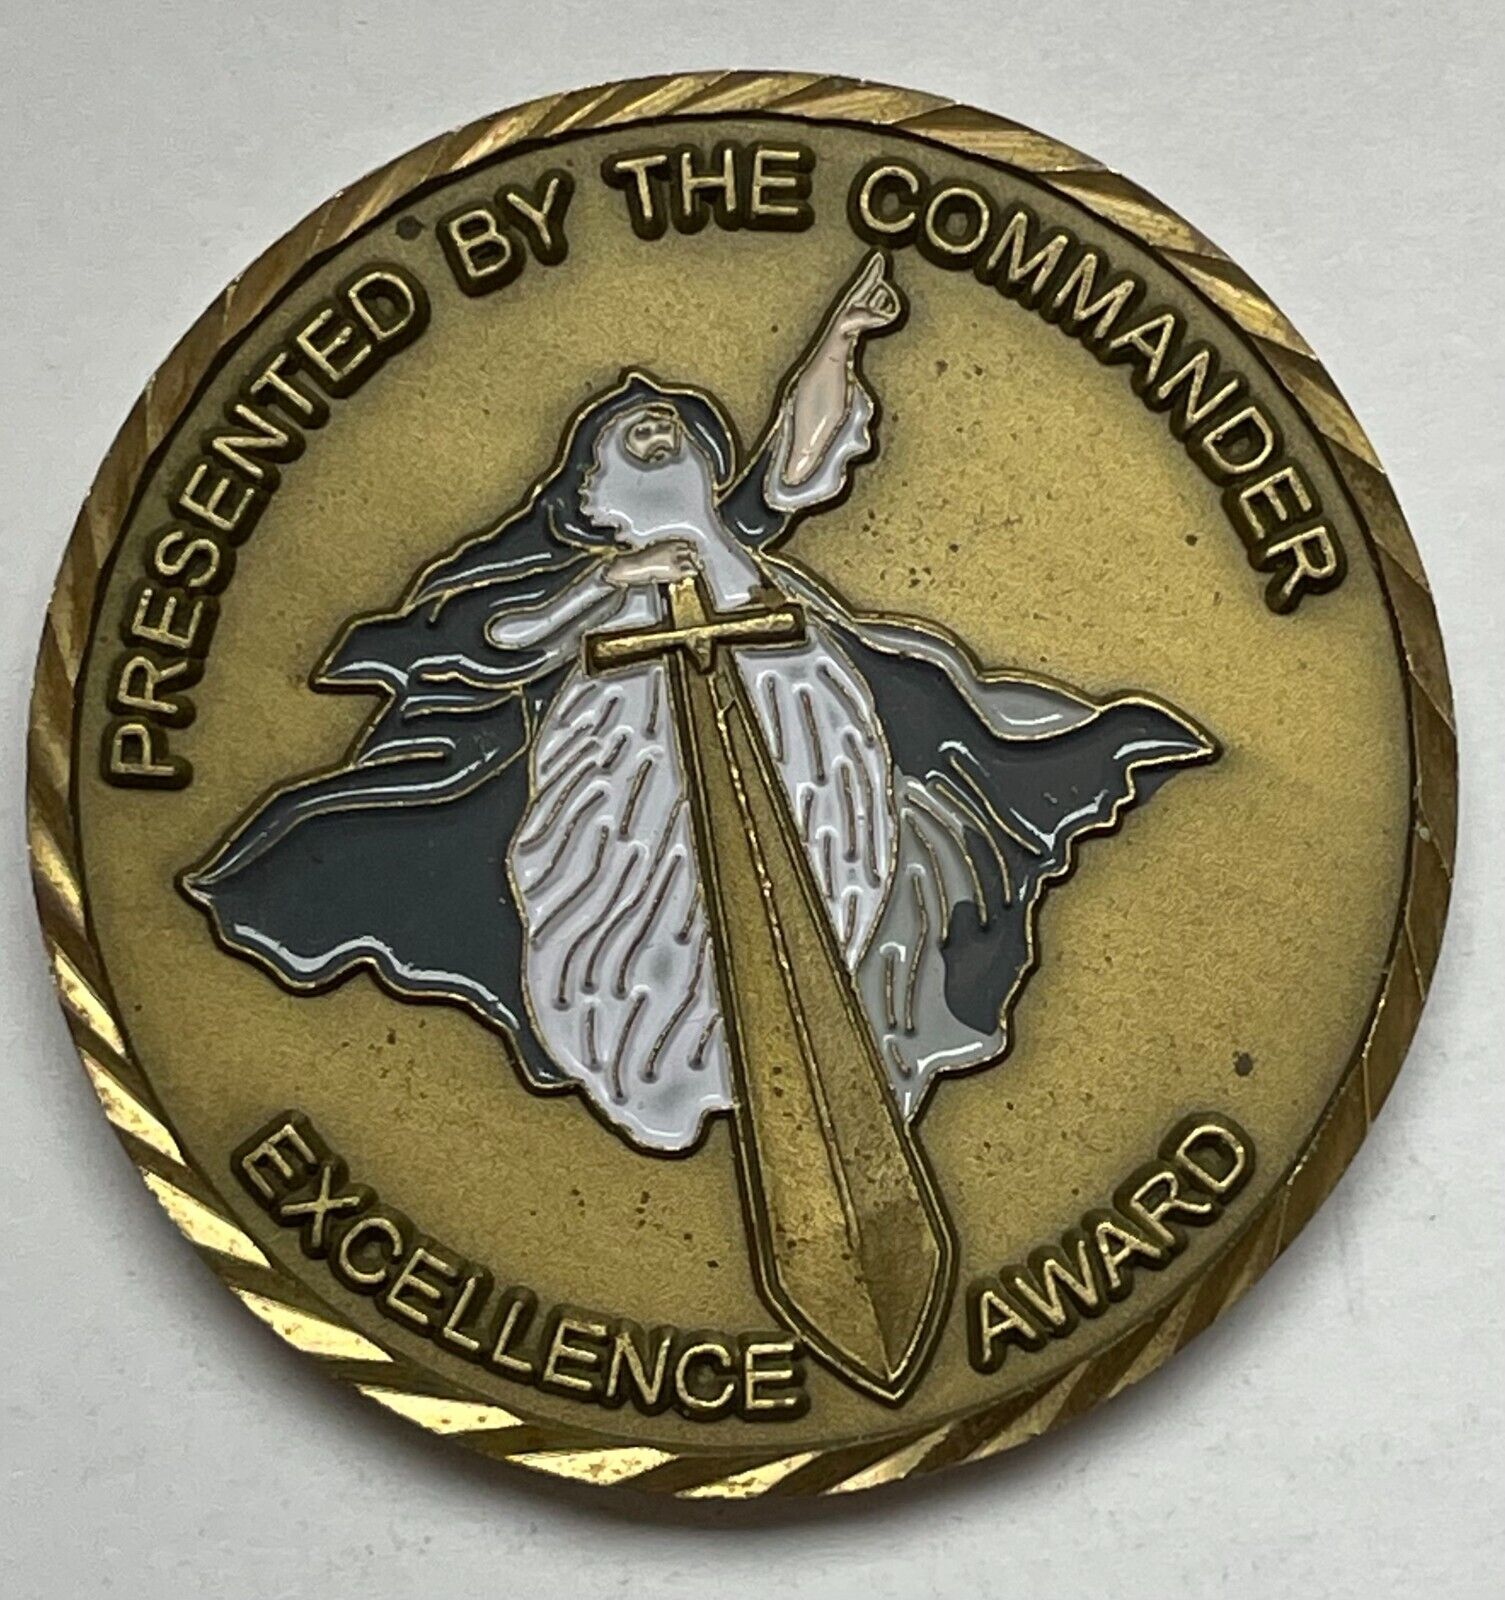 27 OSS Excellence Award Challenge Coin Cannon AFB, NM